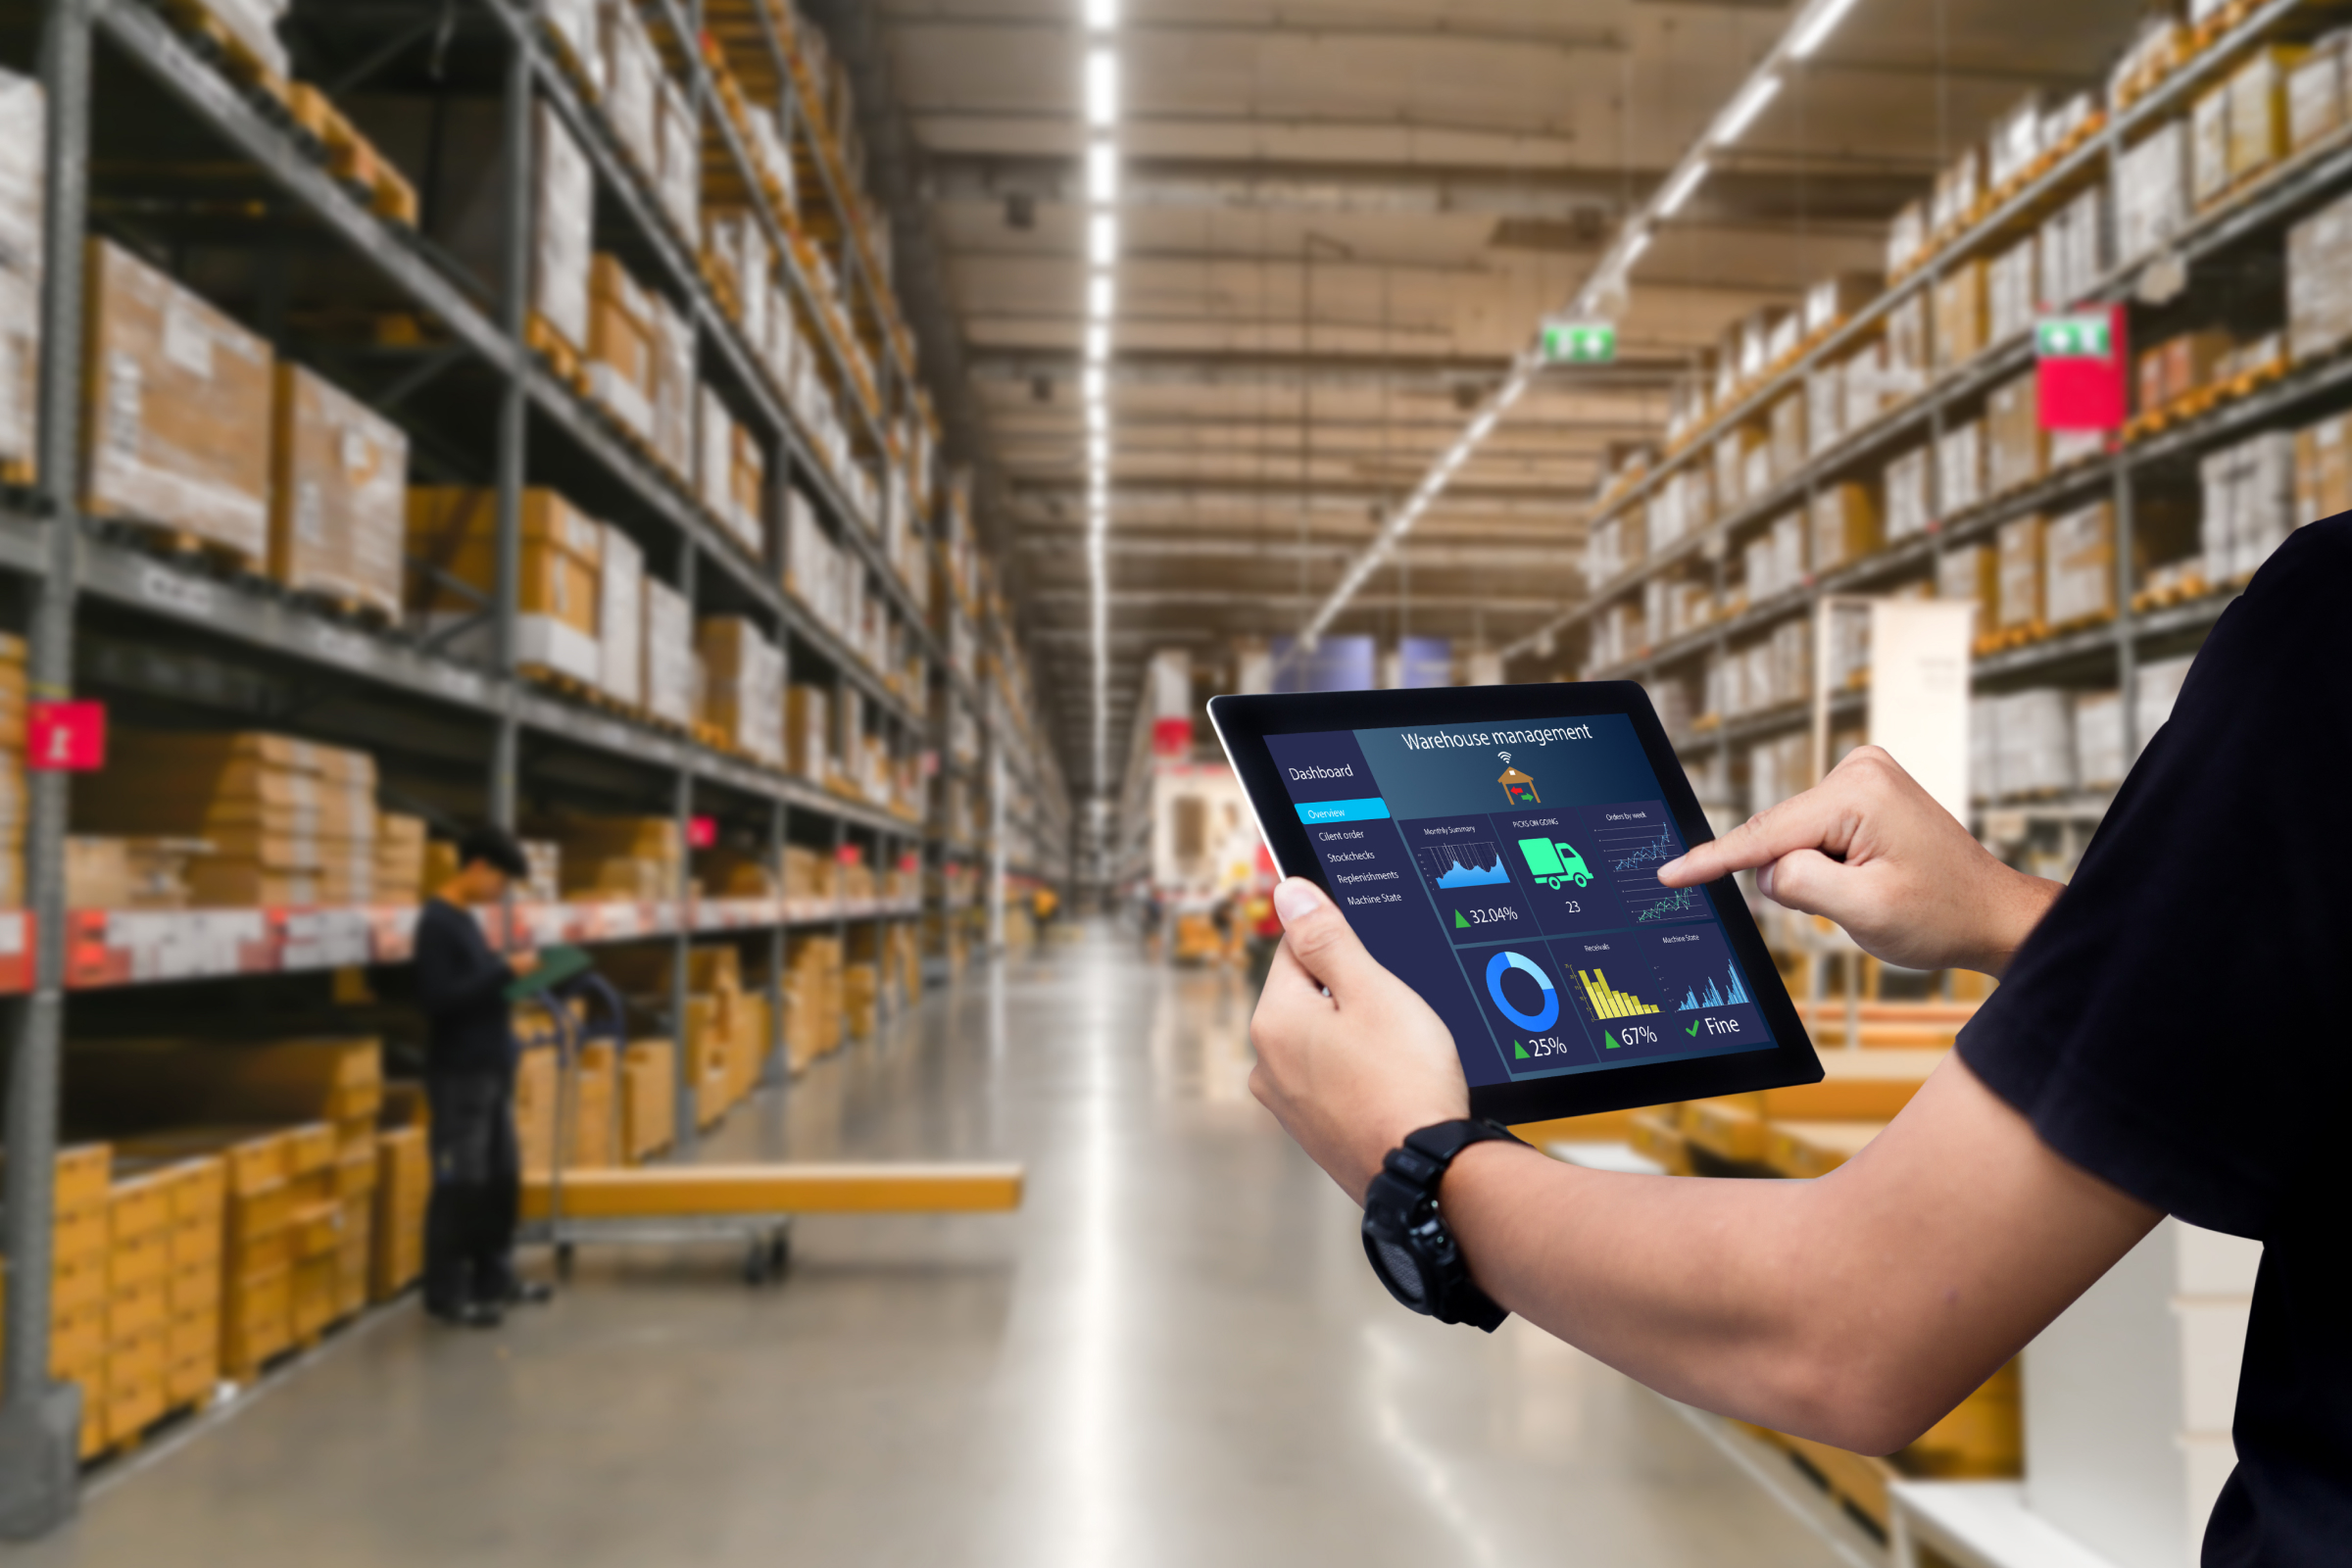 Hands holding a tablet visualizing digital twin warehouse.